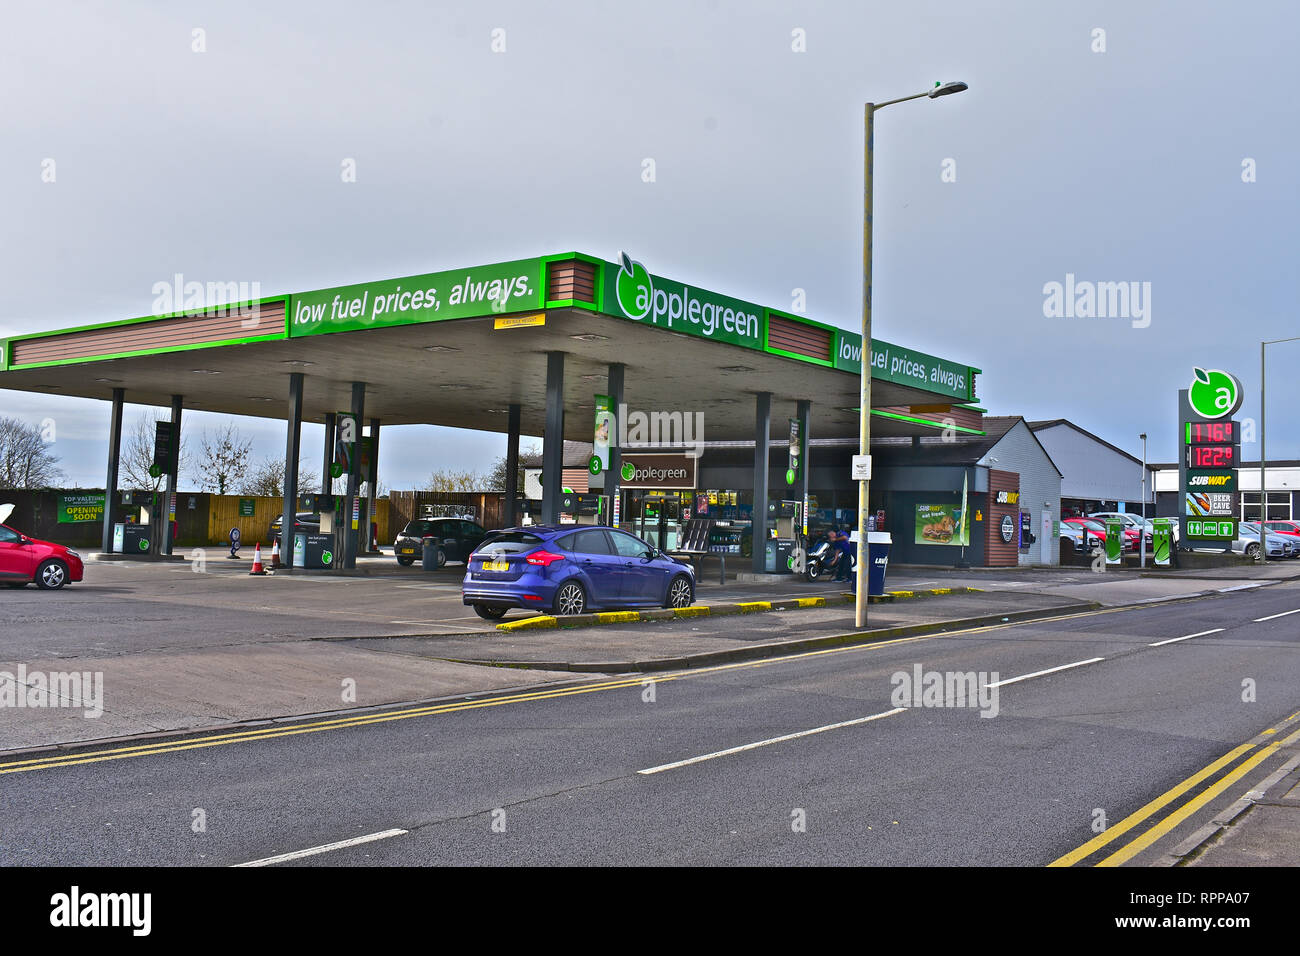 Applegreen Petrol Station in Tramains Road, Bridgend selling low price fuel. Subway shop and beer cave in store. Stock Photo